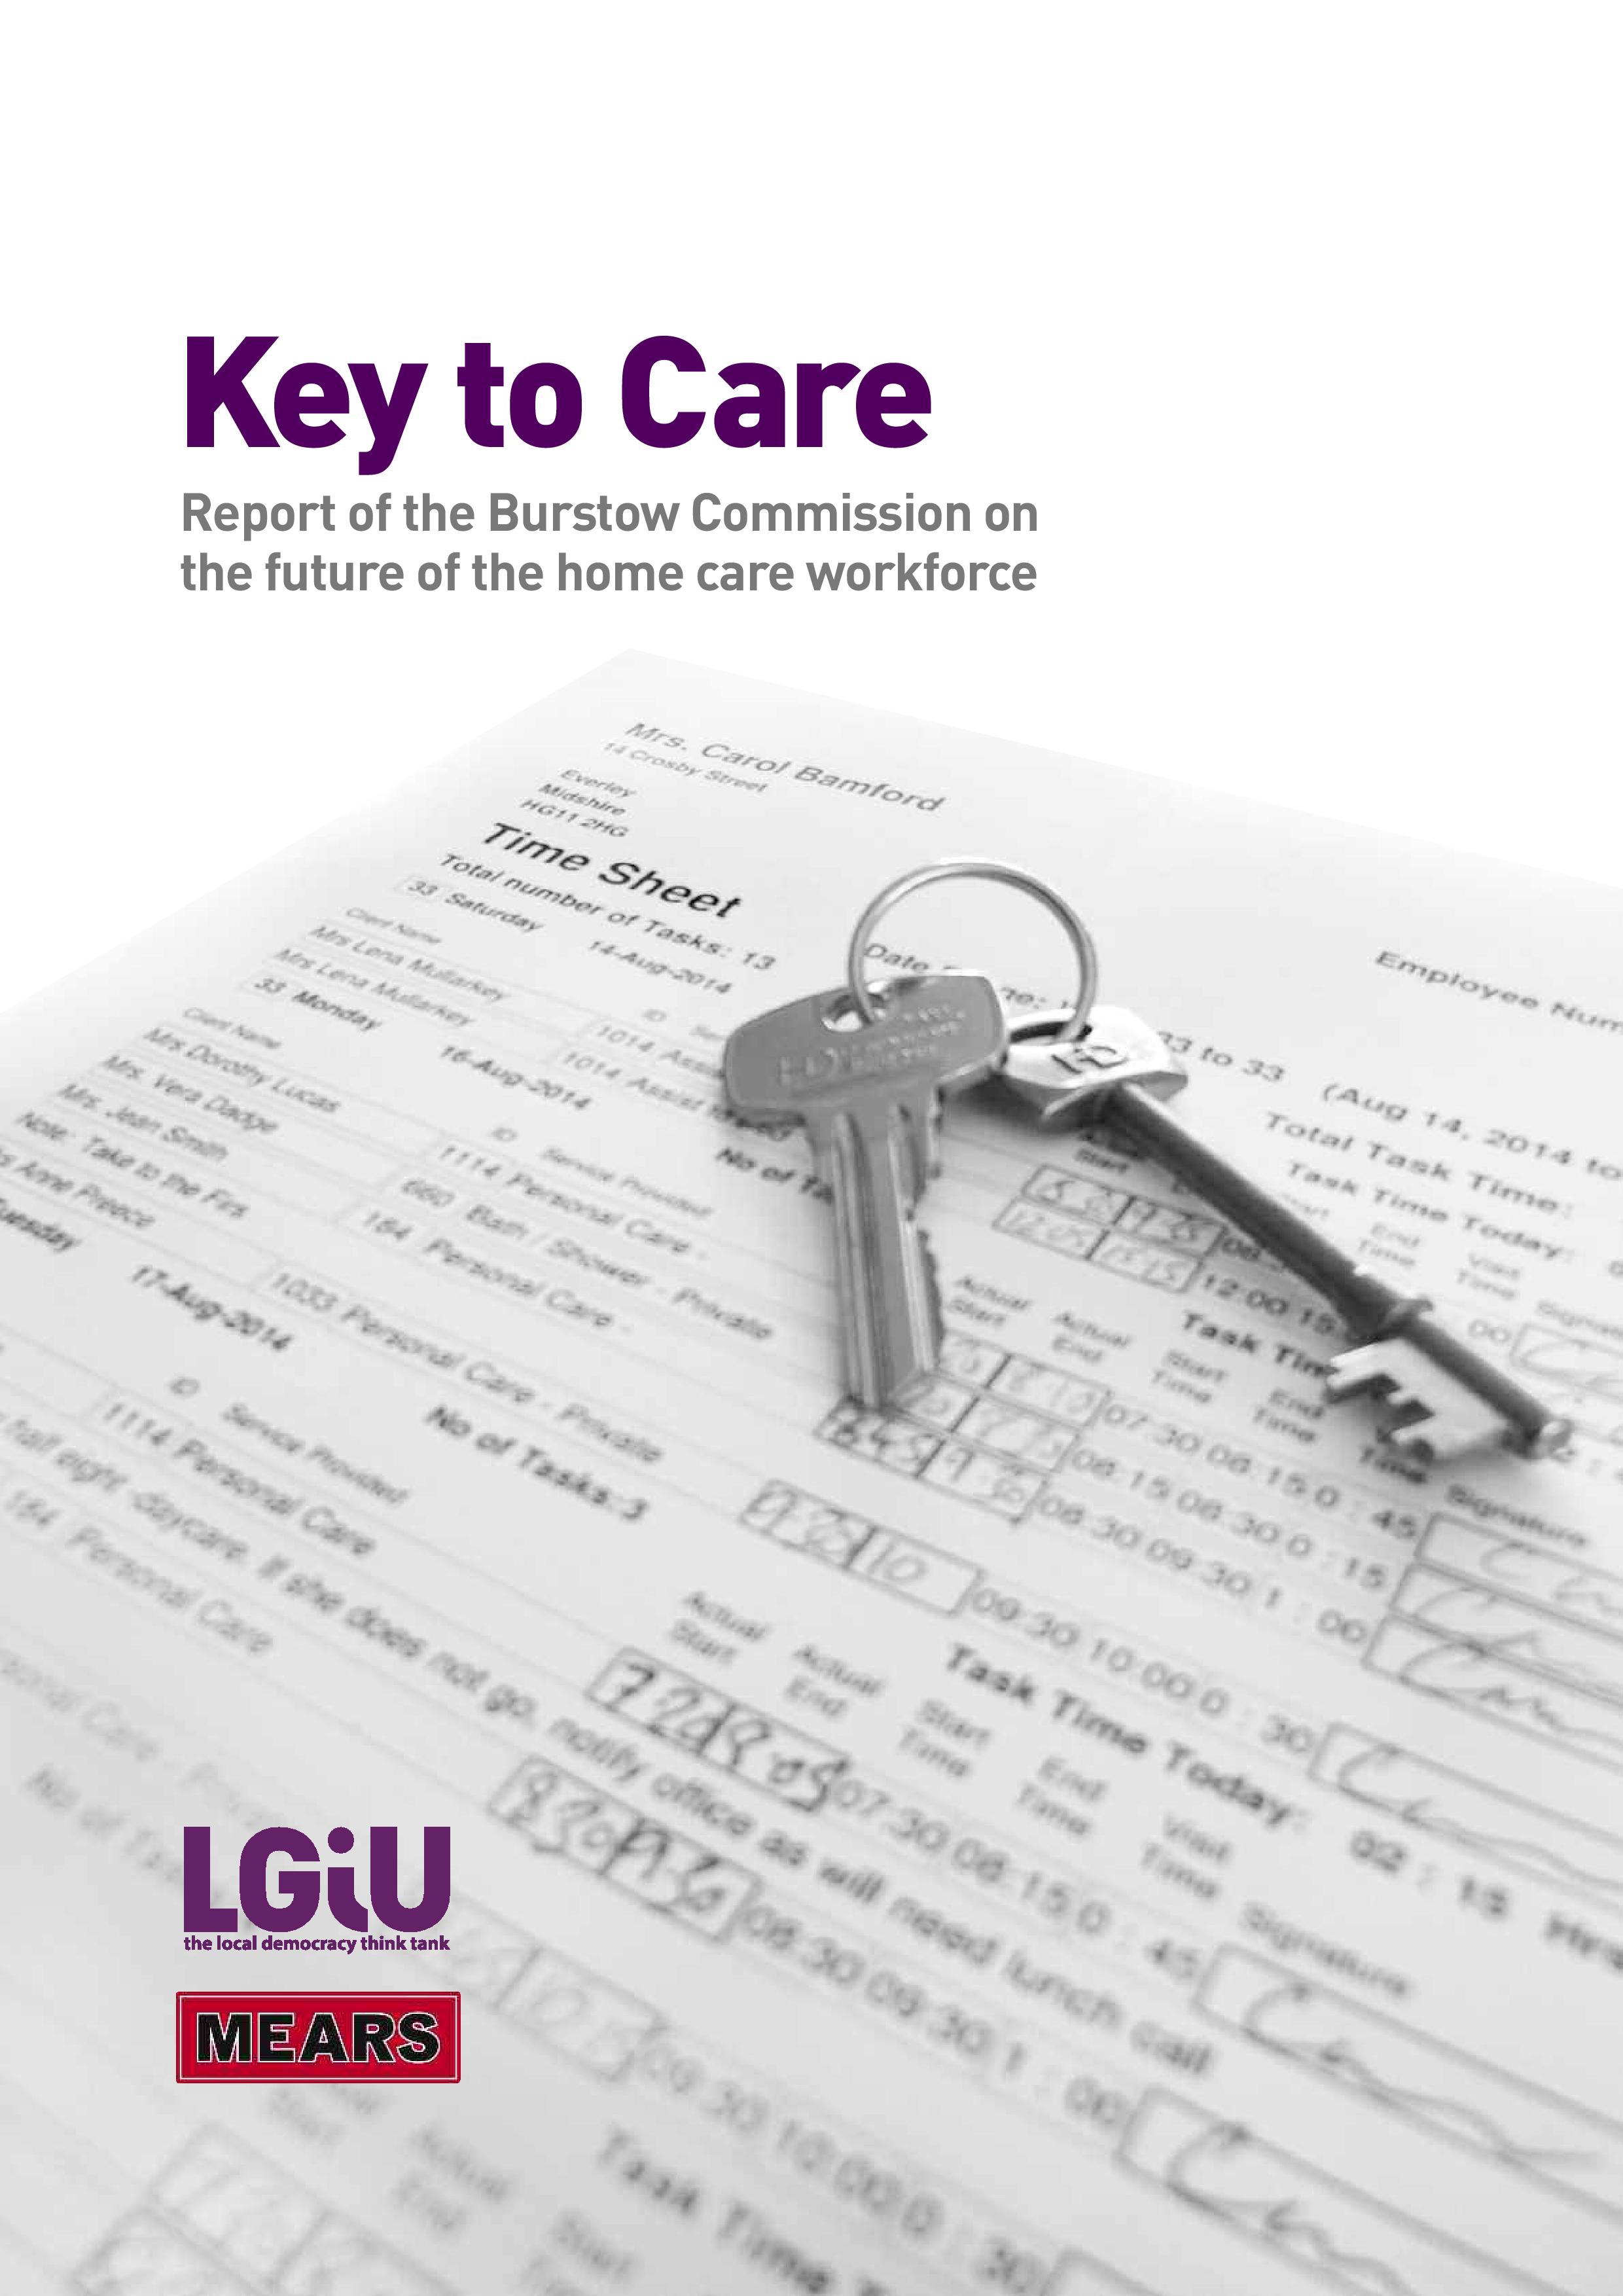 Key to Care (Burstow Commission report)